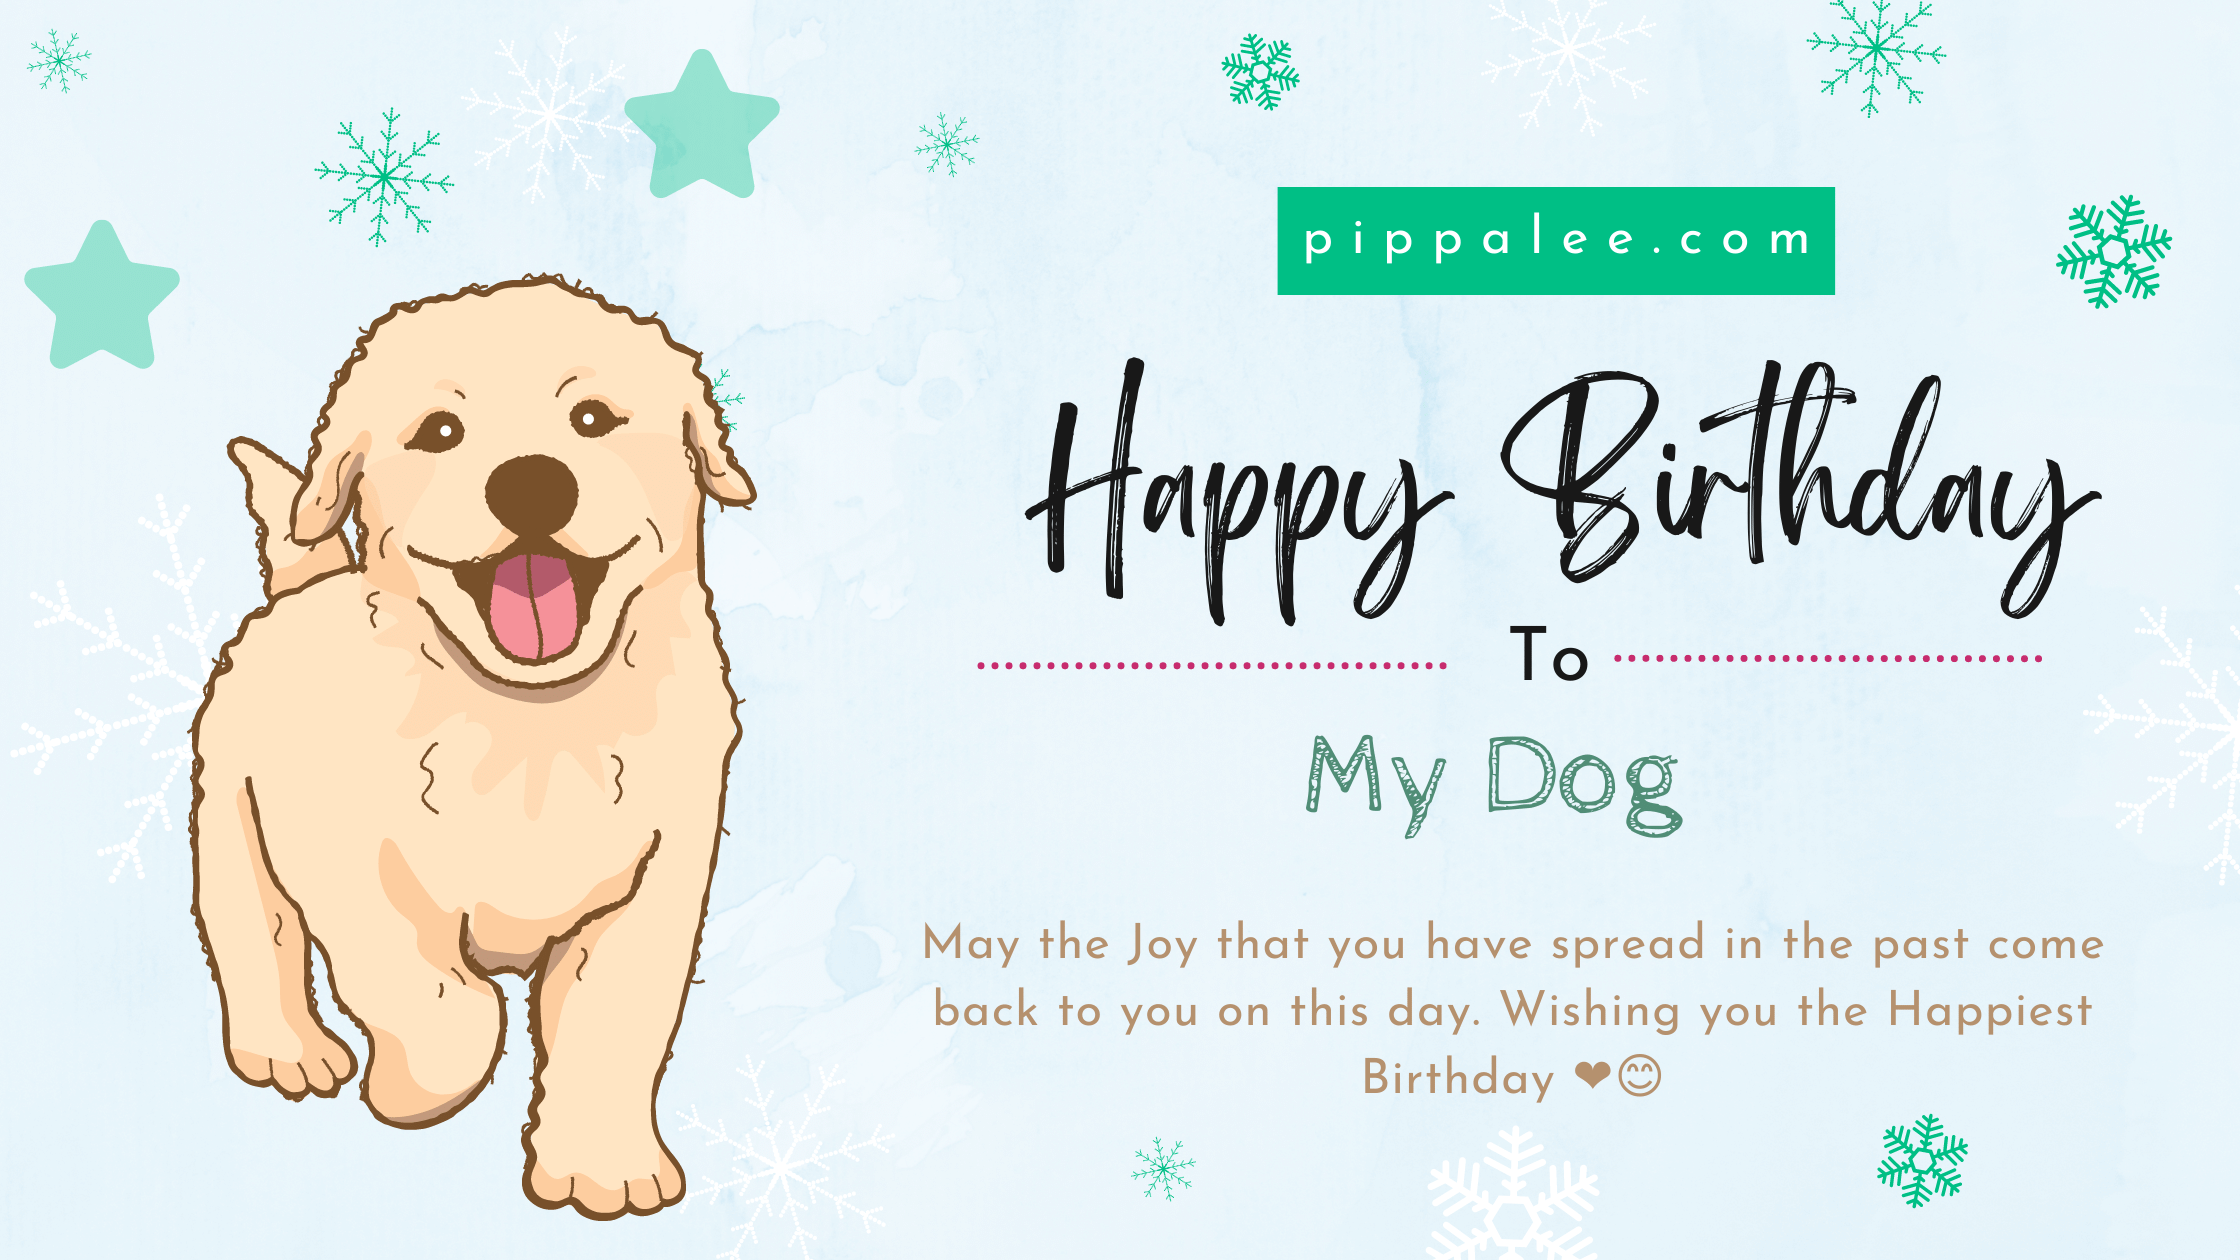 Happy Birthday To My Dog - Wishes & Messages